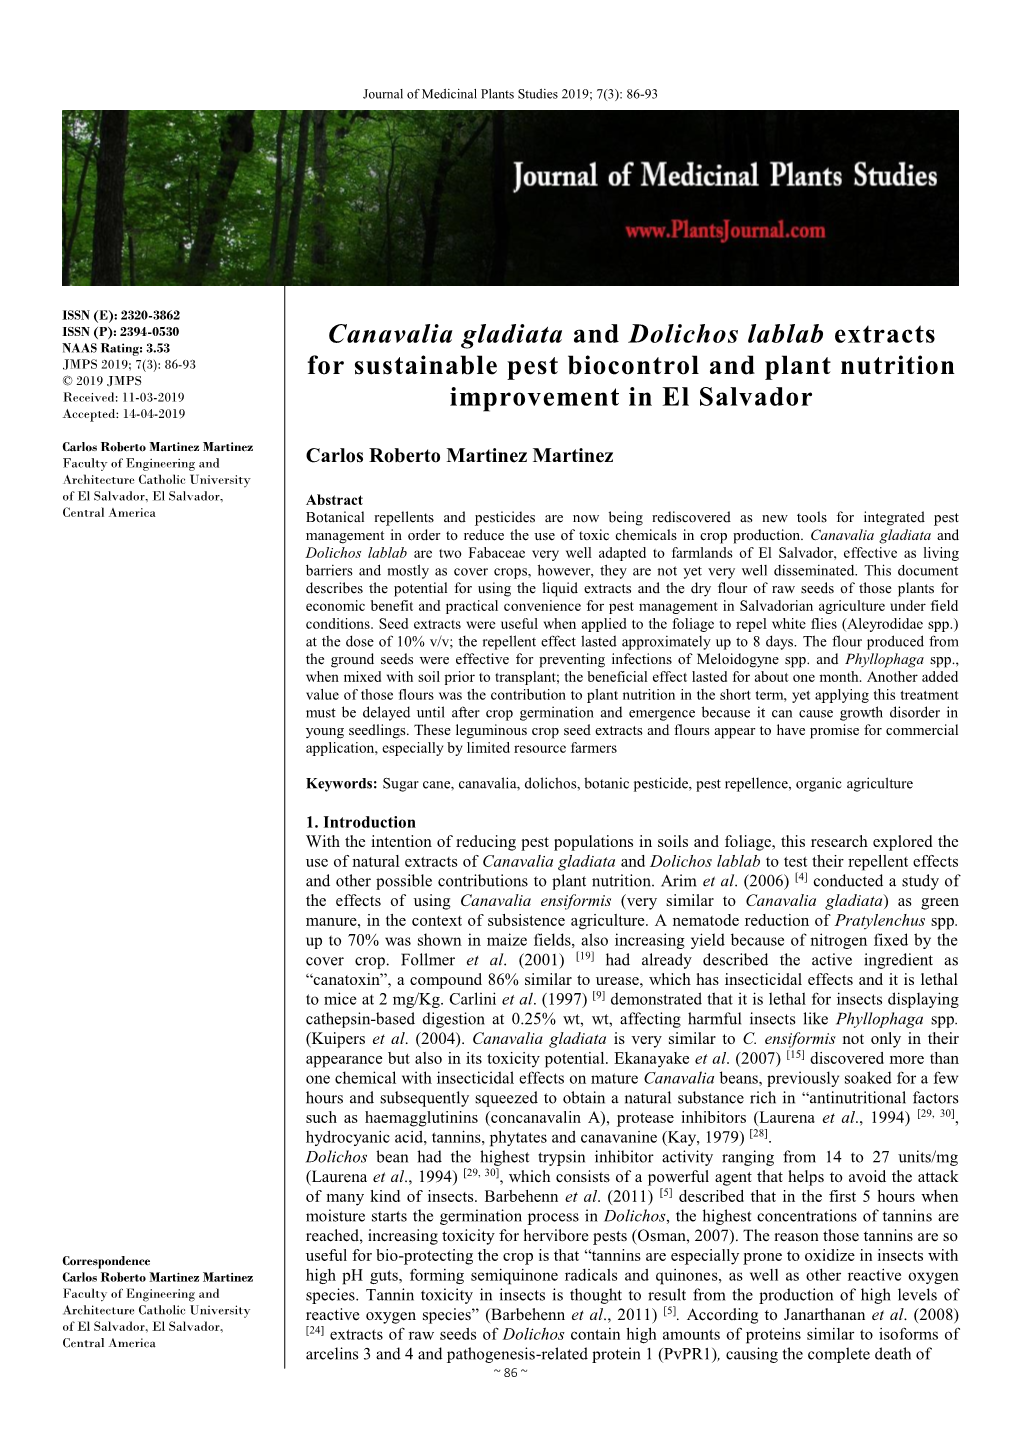 Canavalia Gladiata and Dolichos Lablab Extracts for Sustainable Pest Biocontrol and Plant Nutrition Improvement in El Salvador